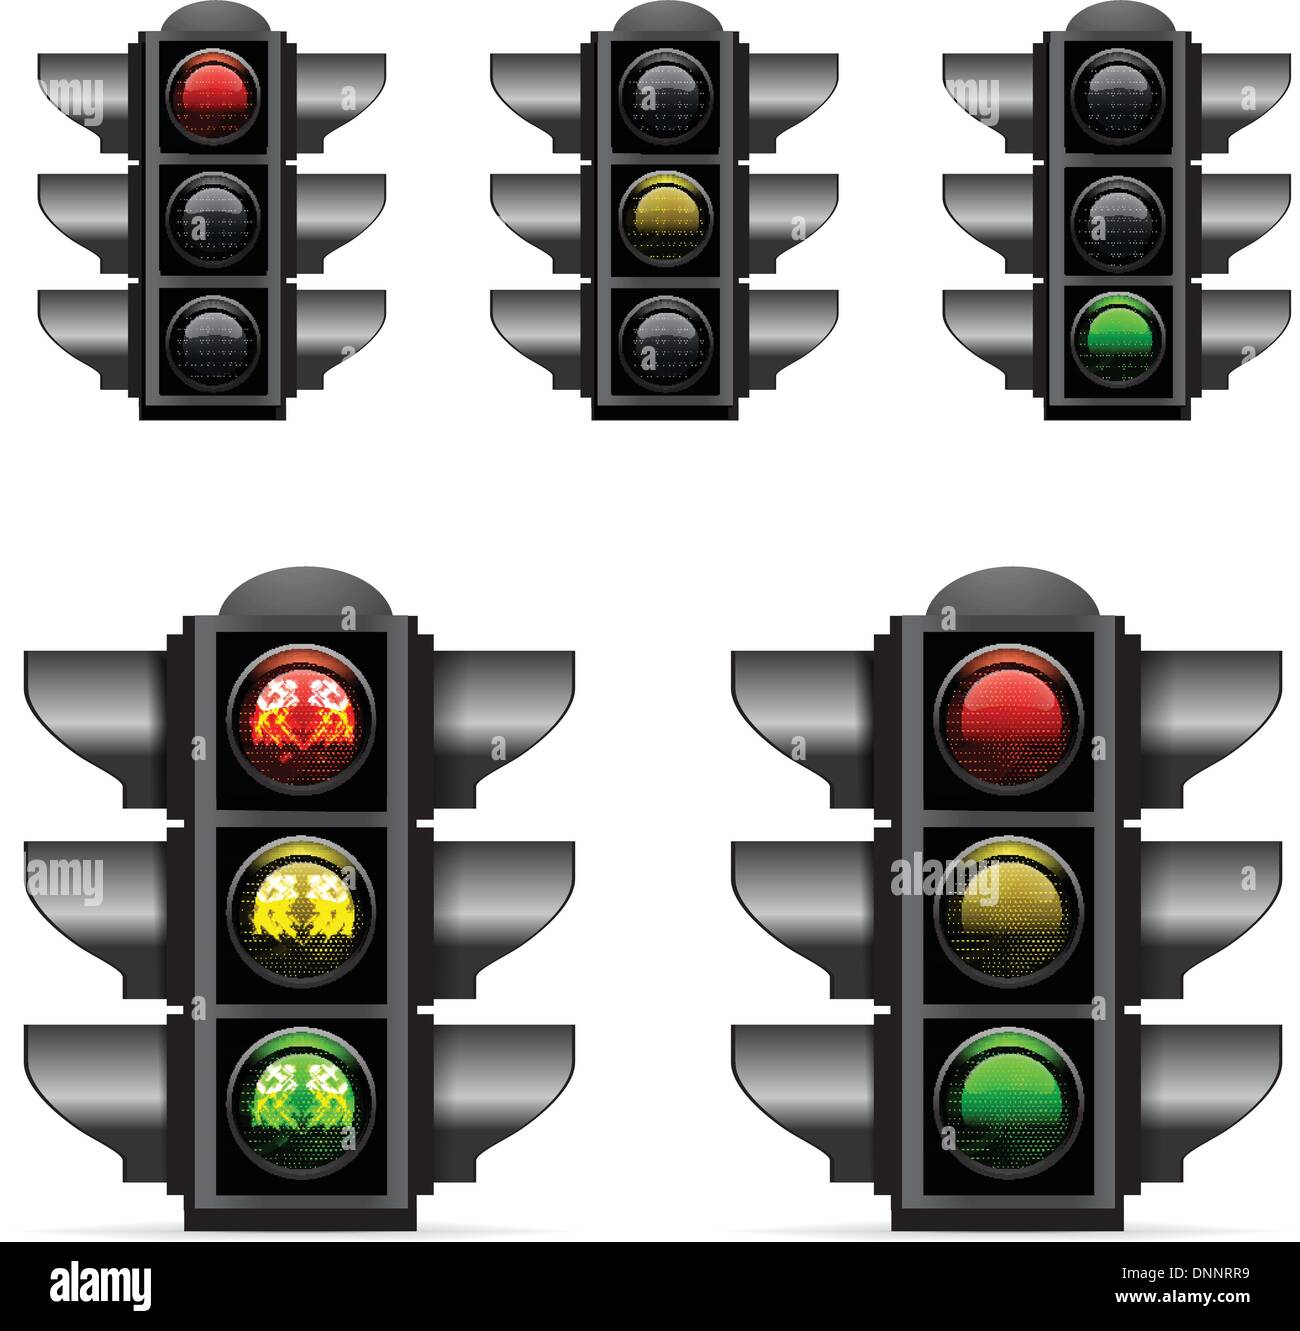 raffic lights with red, yellow and green lights on white background Stock Vector